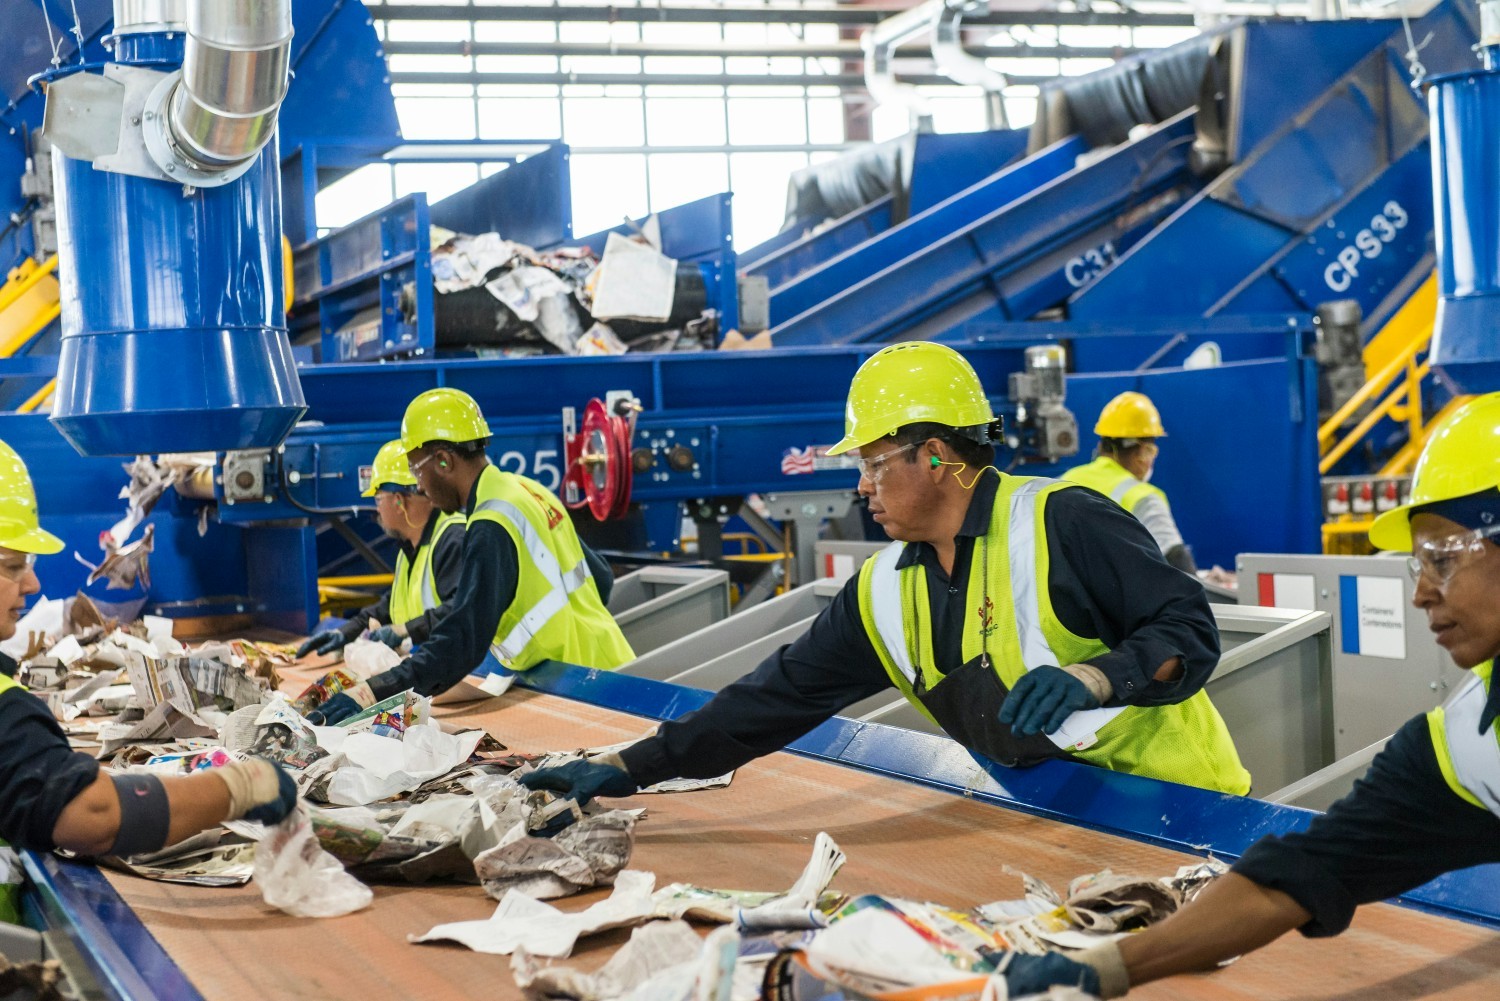 Republic Services employees sort recyclables at our recycling center. In 2022, we processed over 5M tons of recyclables.